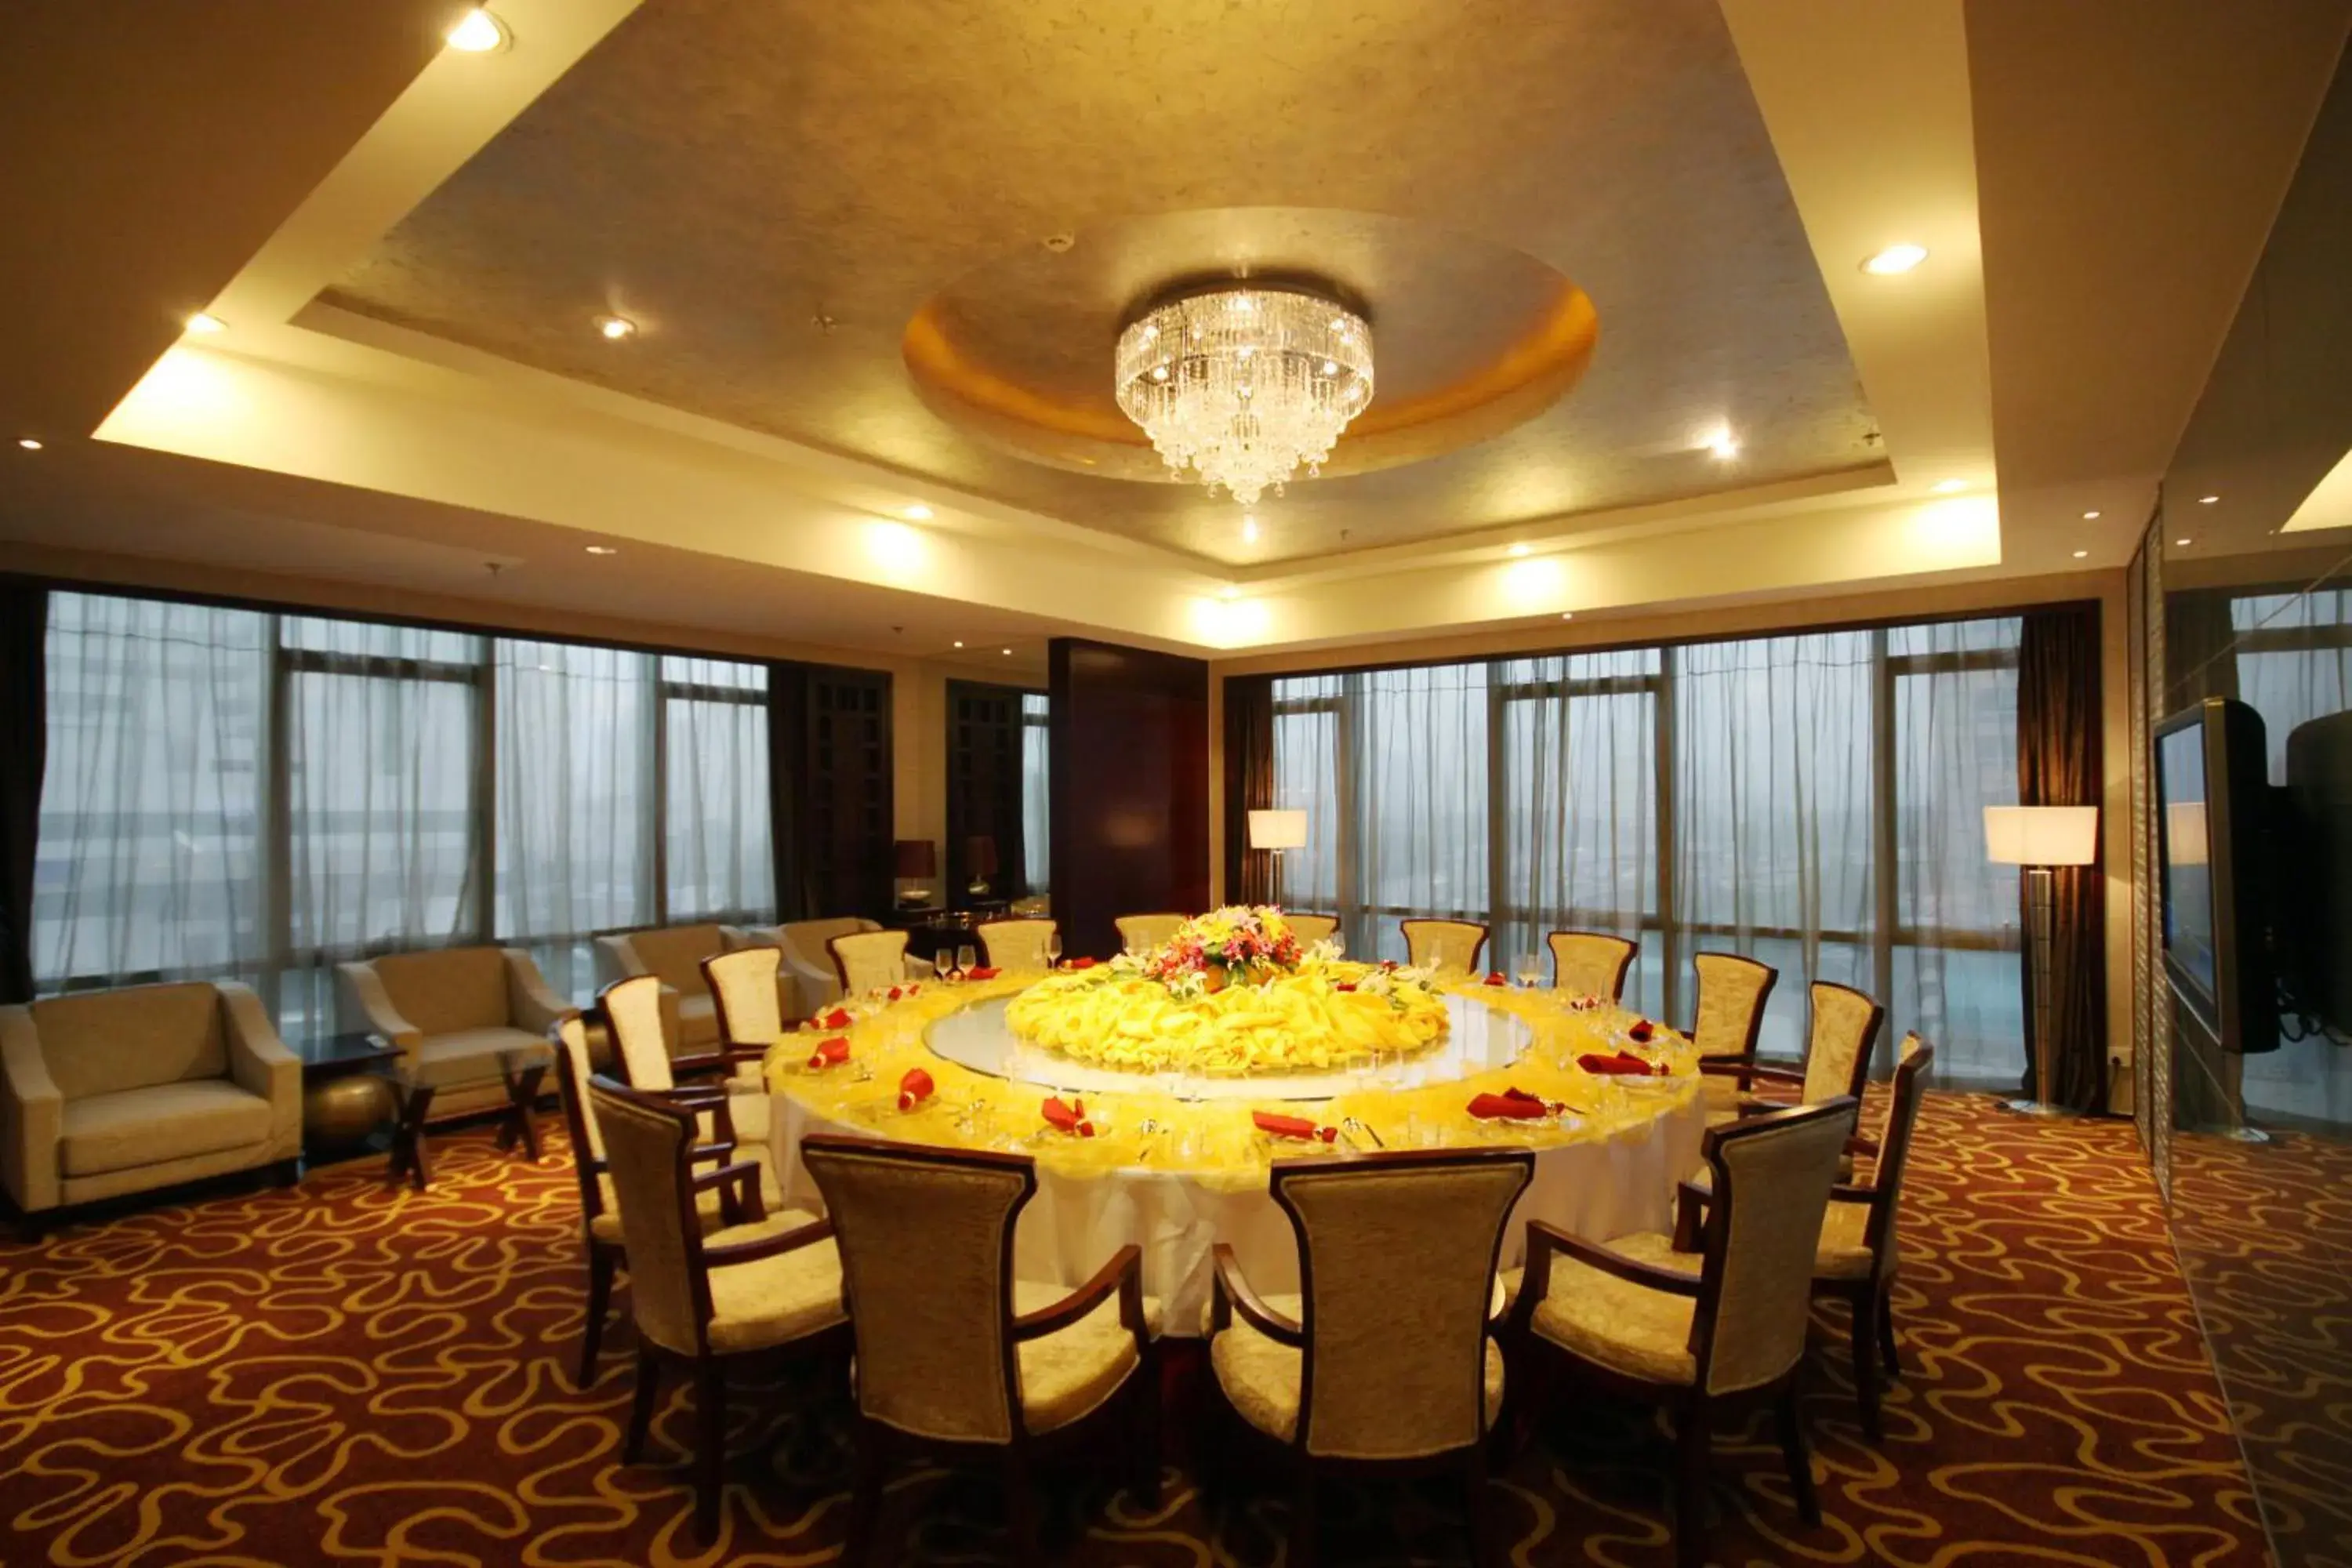 Restaurant/places to eat, Banquet Facilities in Vision Hotel